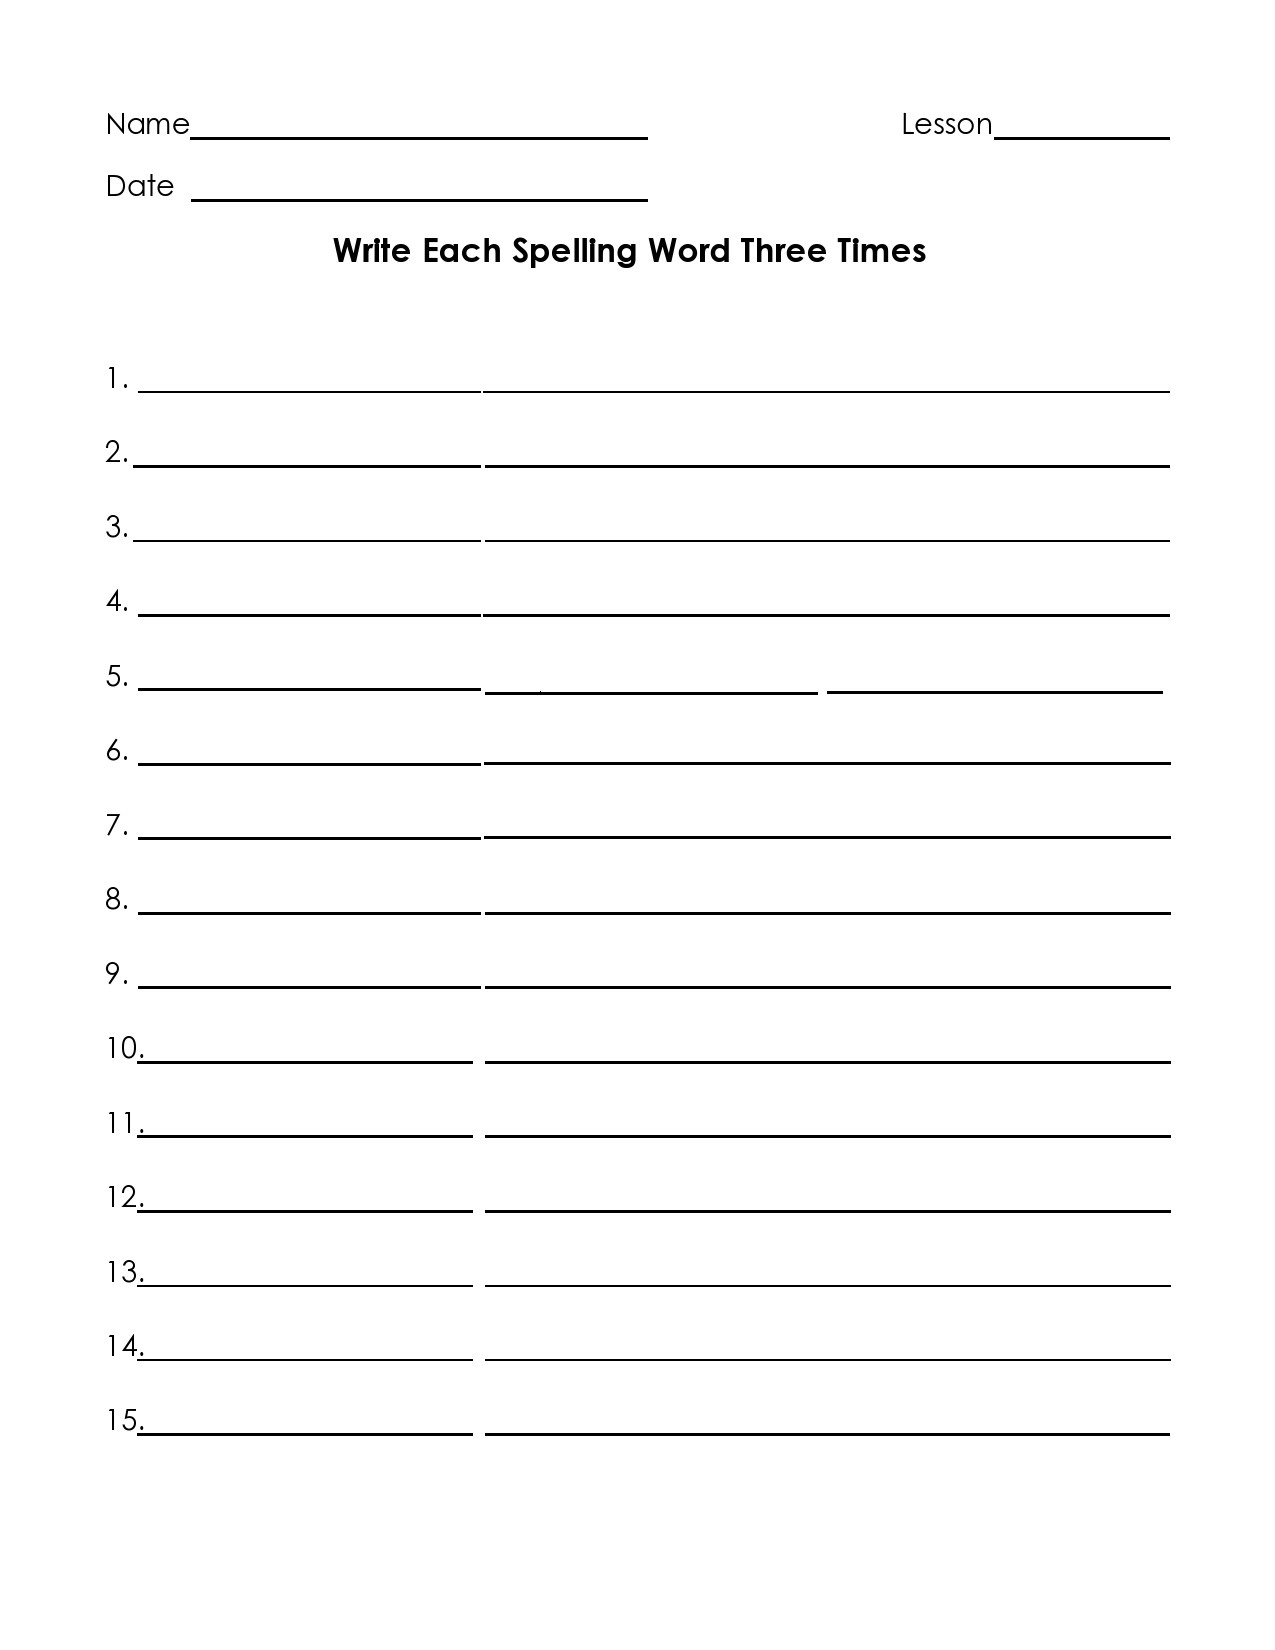 Free spelling test template 16